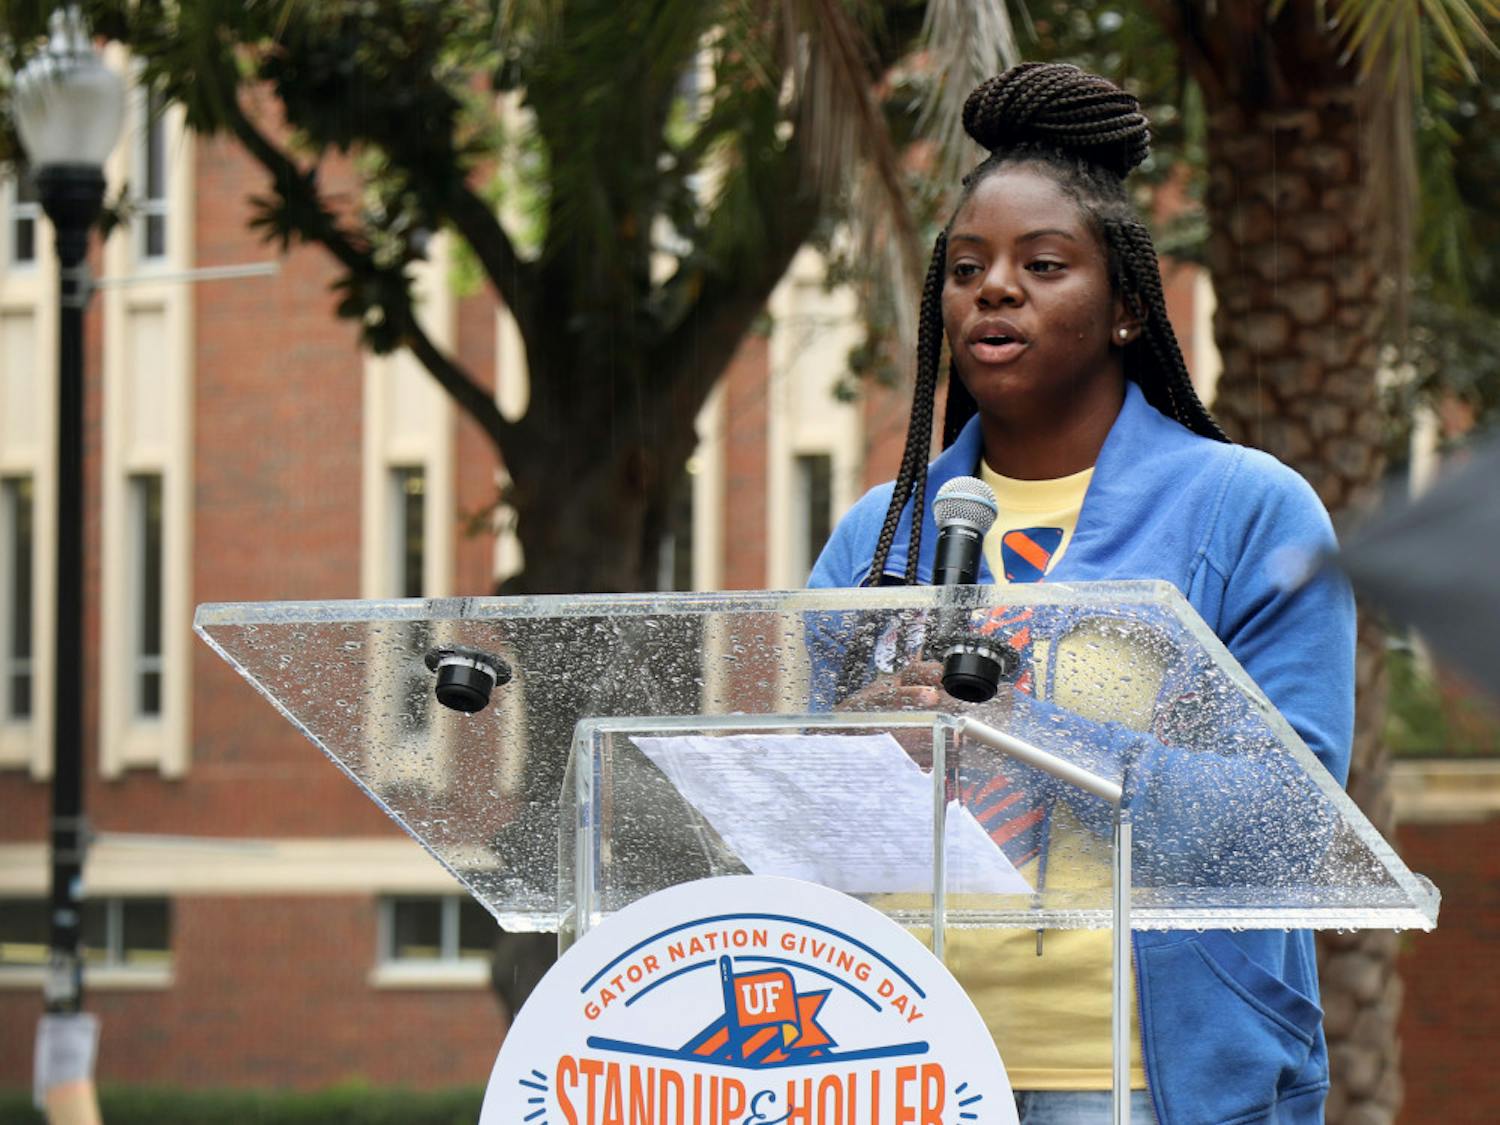 Akiya Parks, a first-generation student and Machen Florida Opportunity Scholar, addresses the crowd on the Plaza of the Americas Feb. 26, 2019, for the “Stand Up and Holler: Gator Nation Giving Day.” 